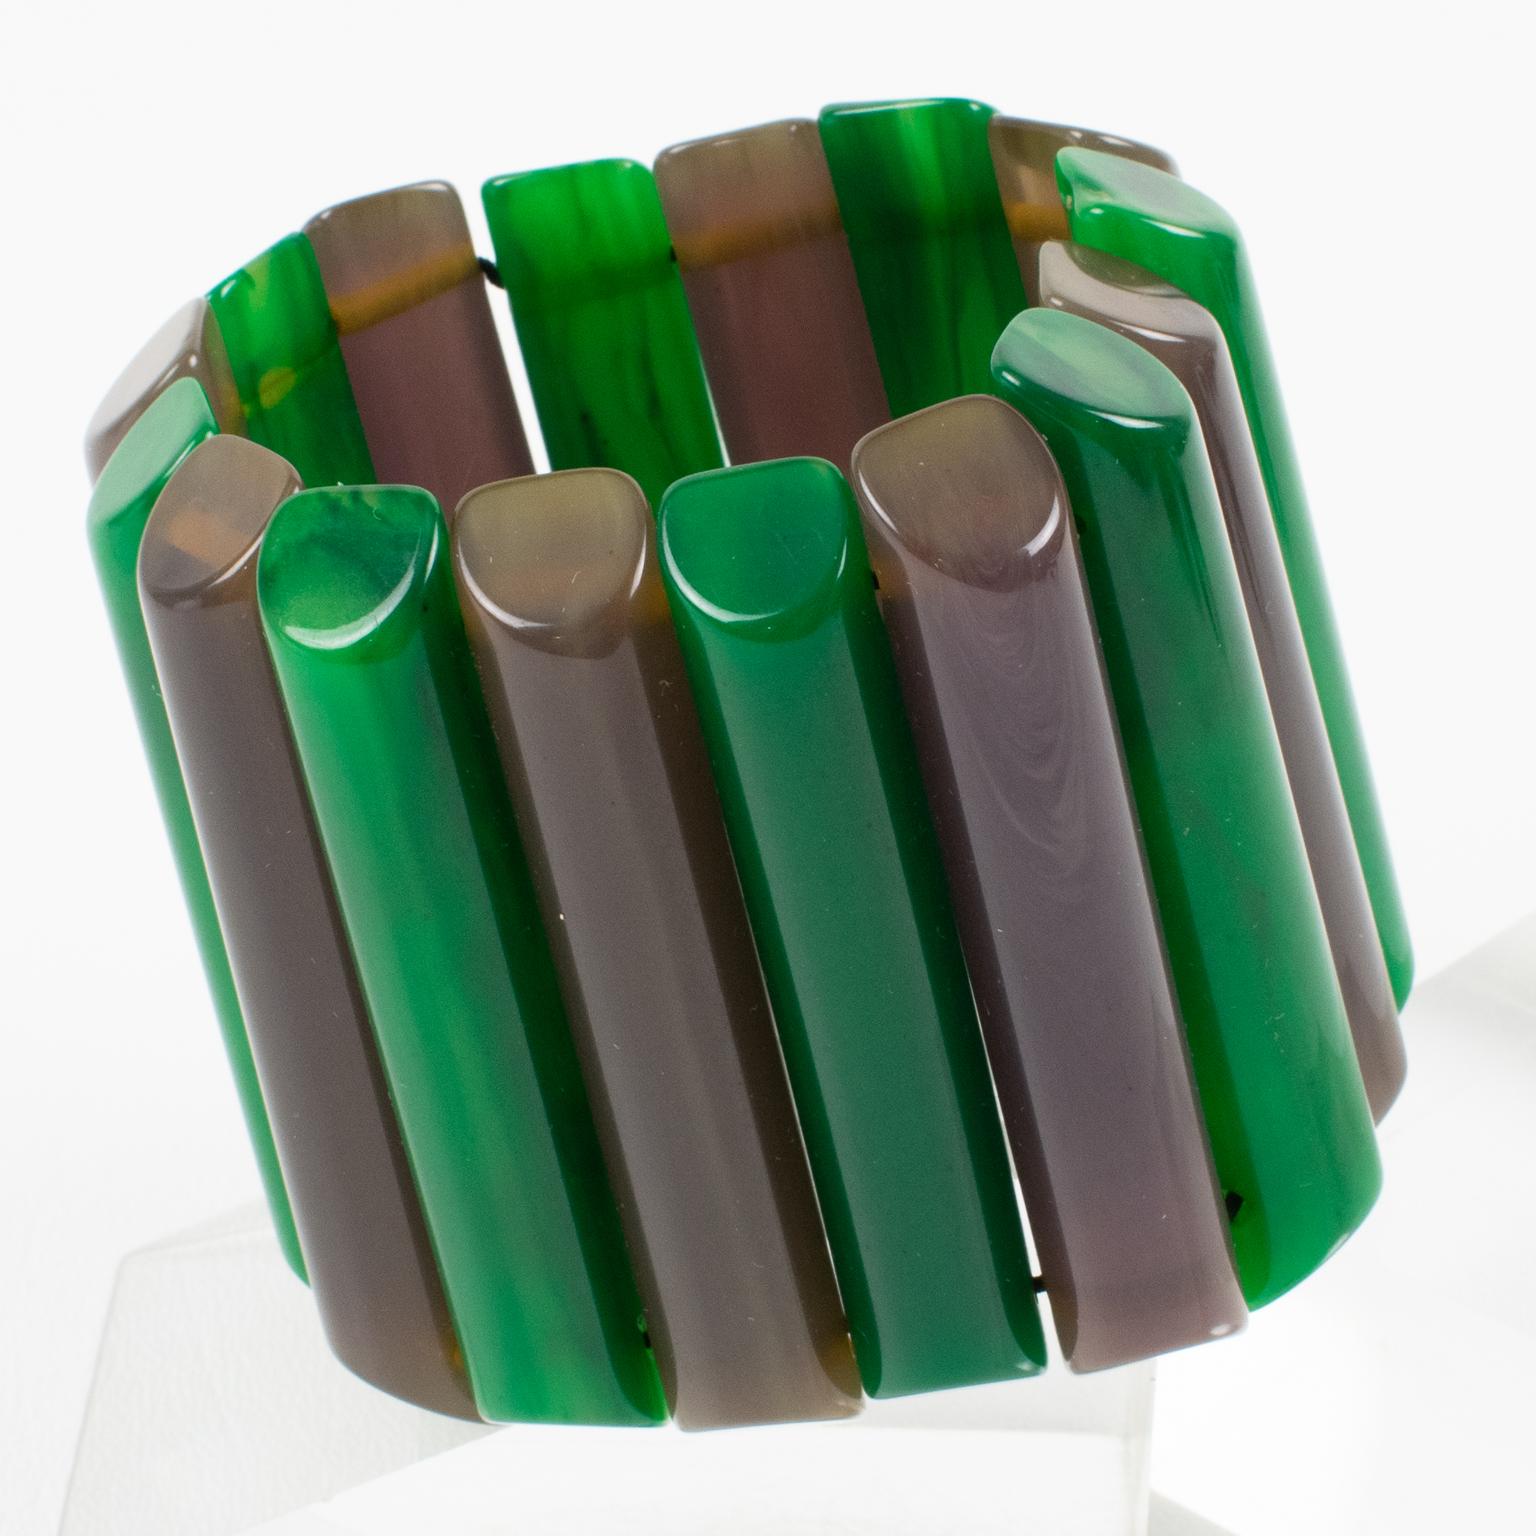 This is a remarkable Bakelite bracelet bangle that I think you'll love. The stretch design and oversized shape make it a rare find, and the carved sticks in alternating emerald green marble and dark mouse gray colors add to its unique appeal. It was